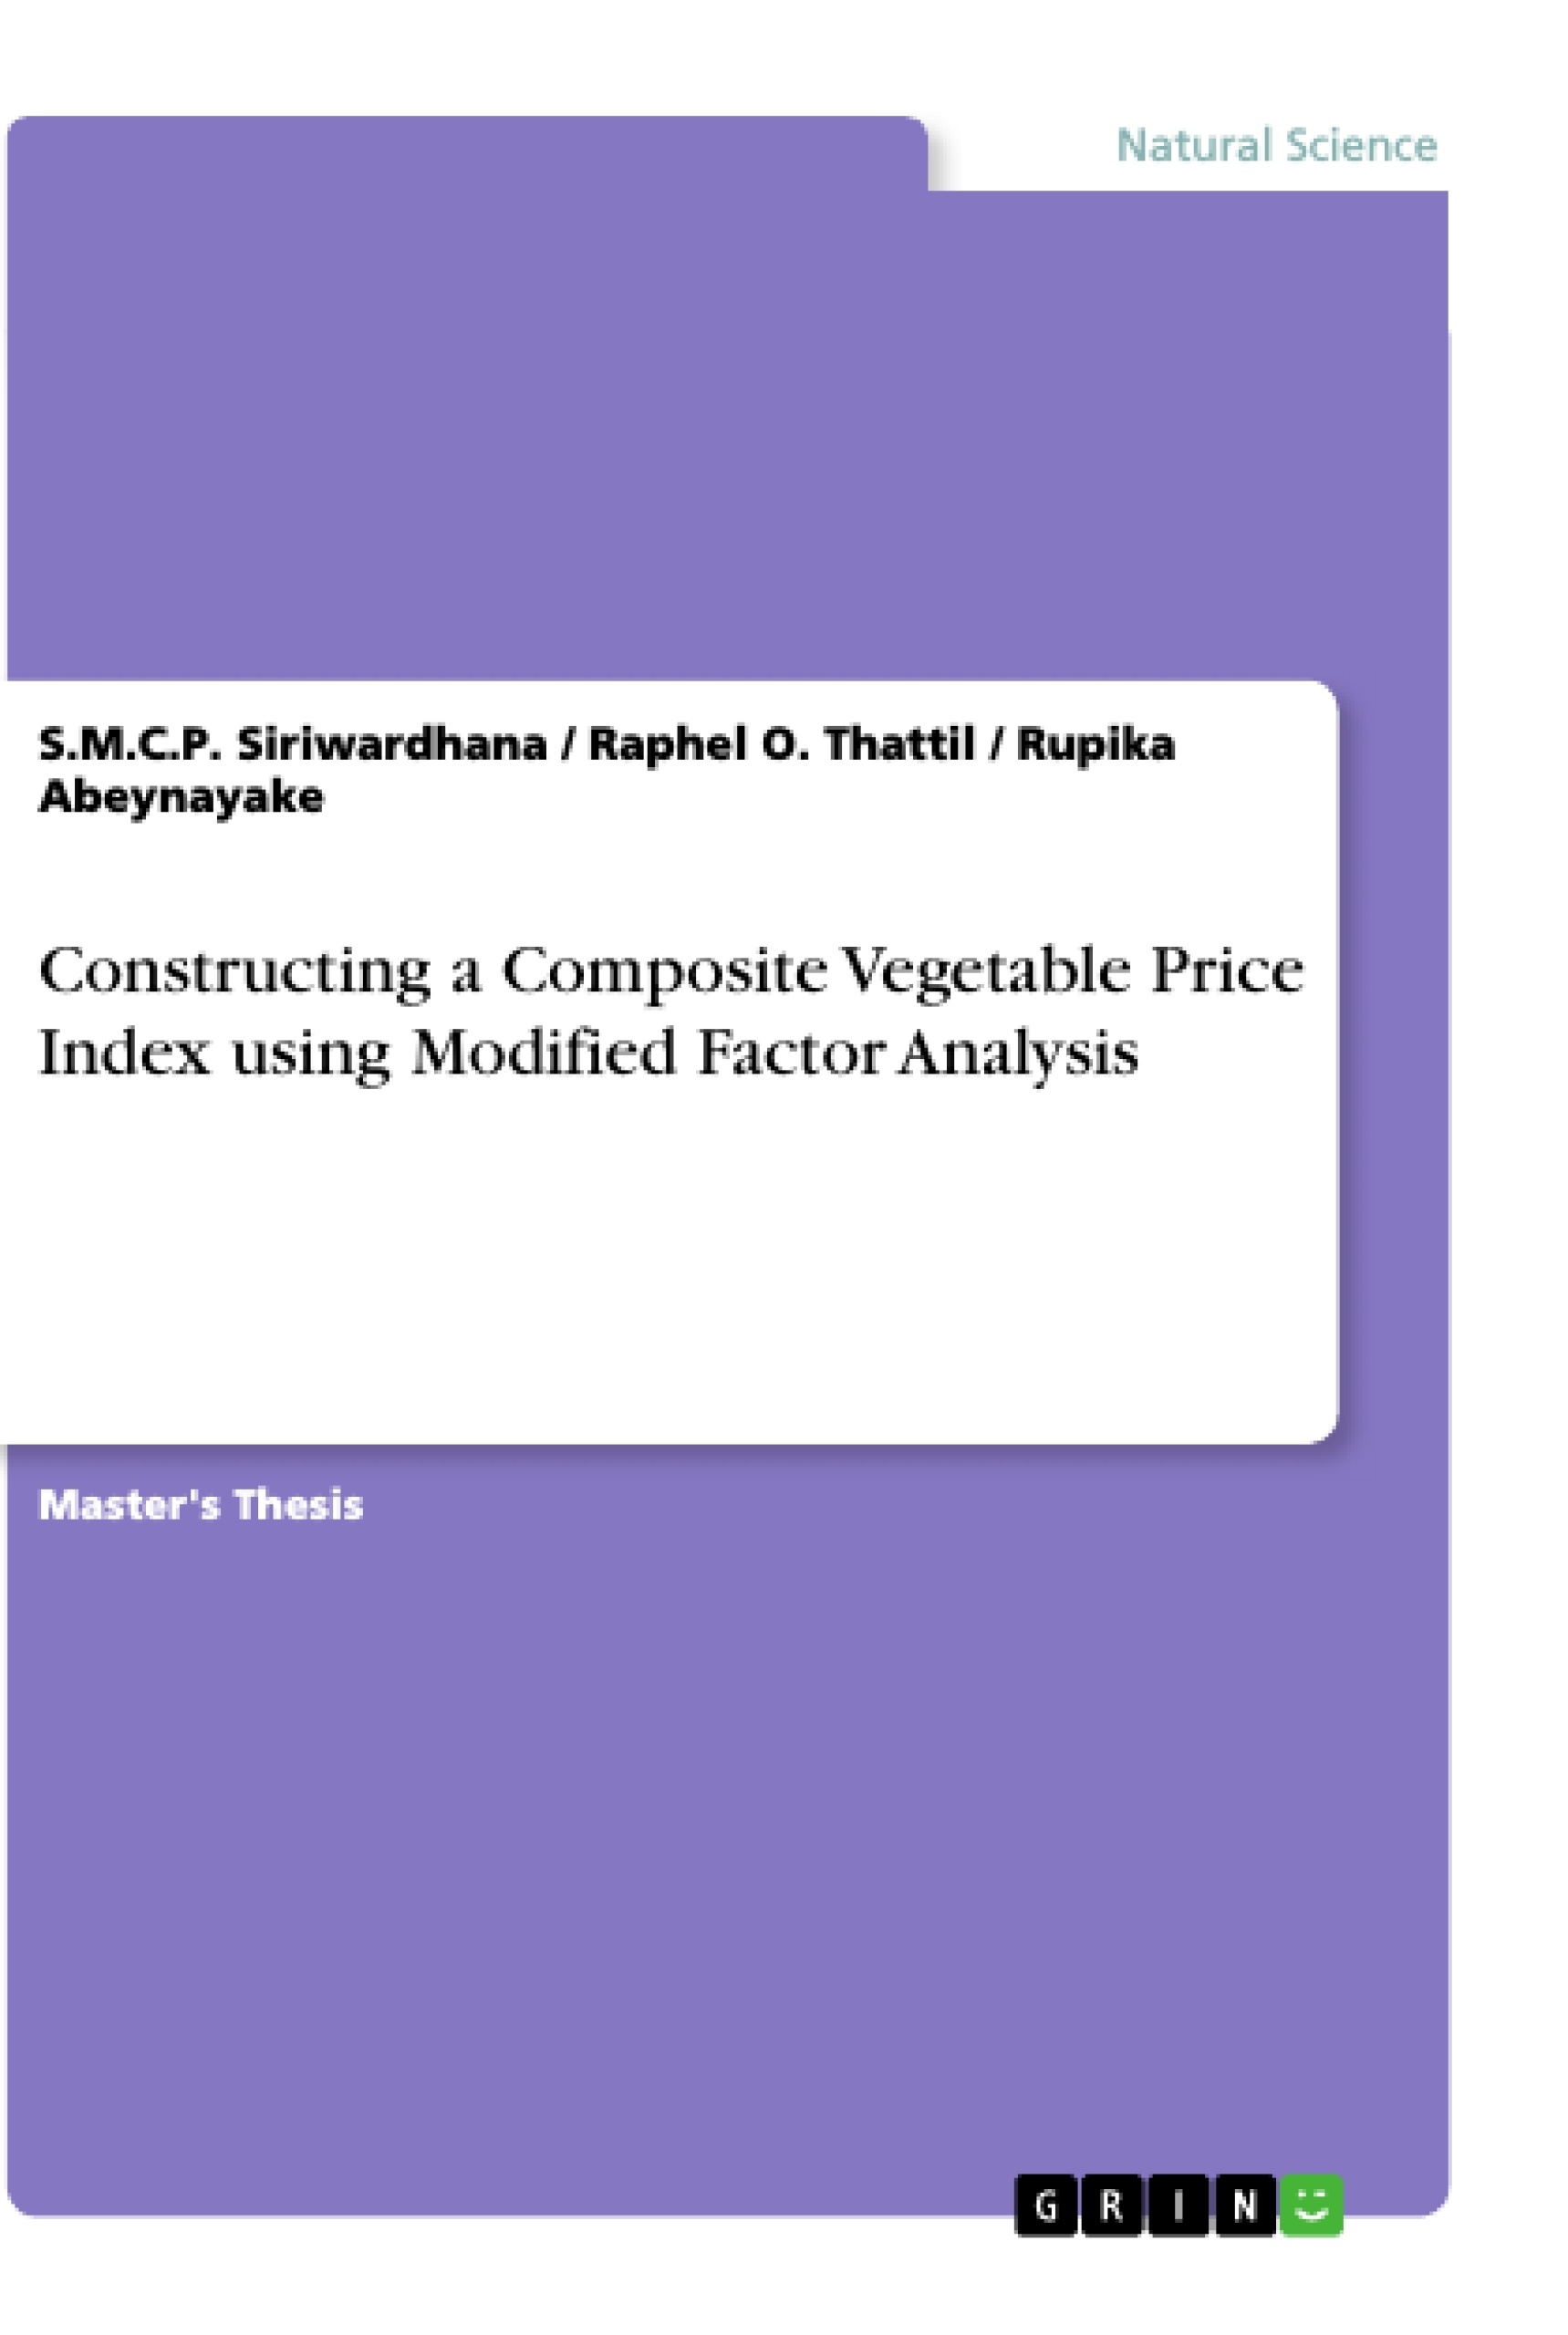 Título: Constructing a Composite Vegetable Price Index using Modified Factor Analysis